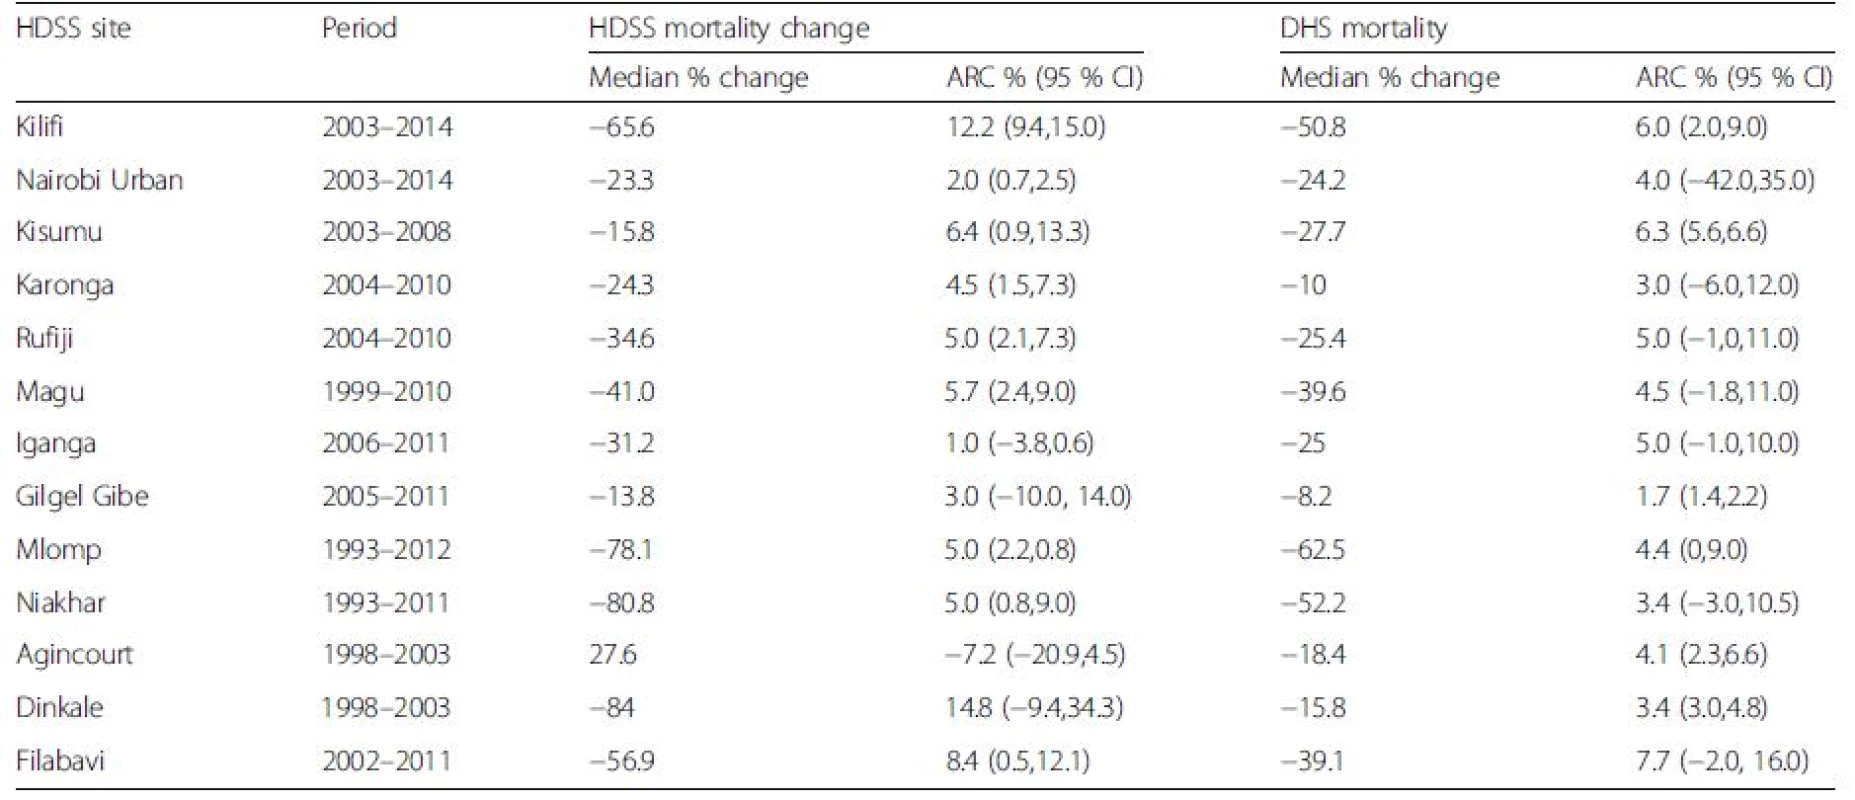 Annualized rate of change (ARC) of under-five mortality rates using DHS and HDSS approaches